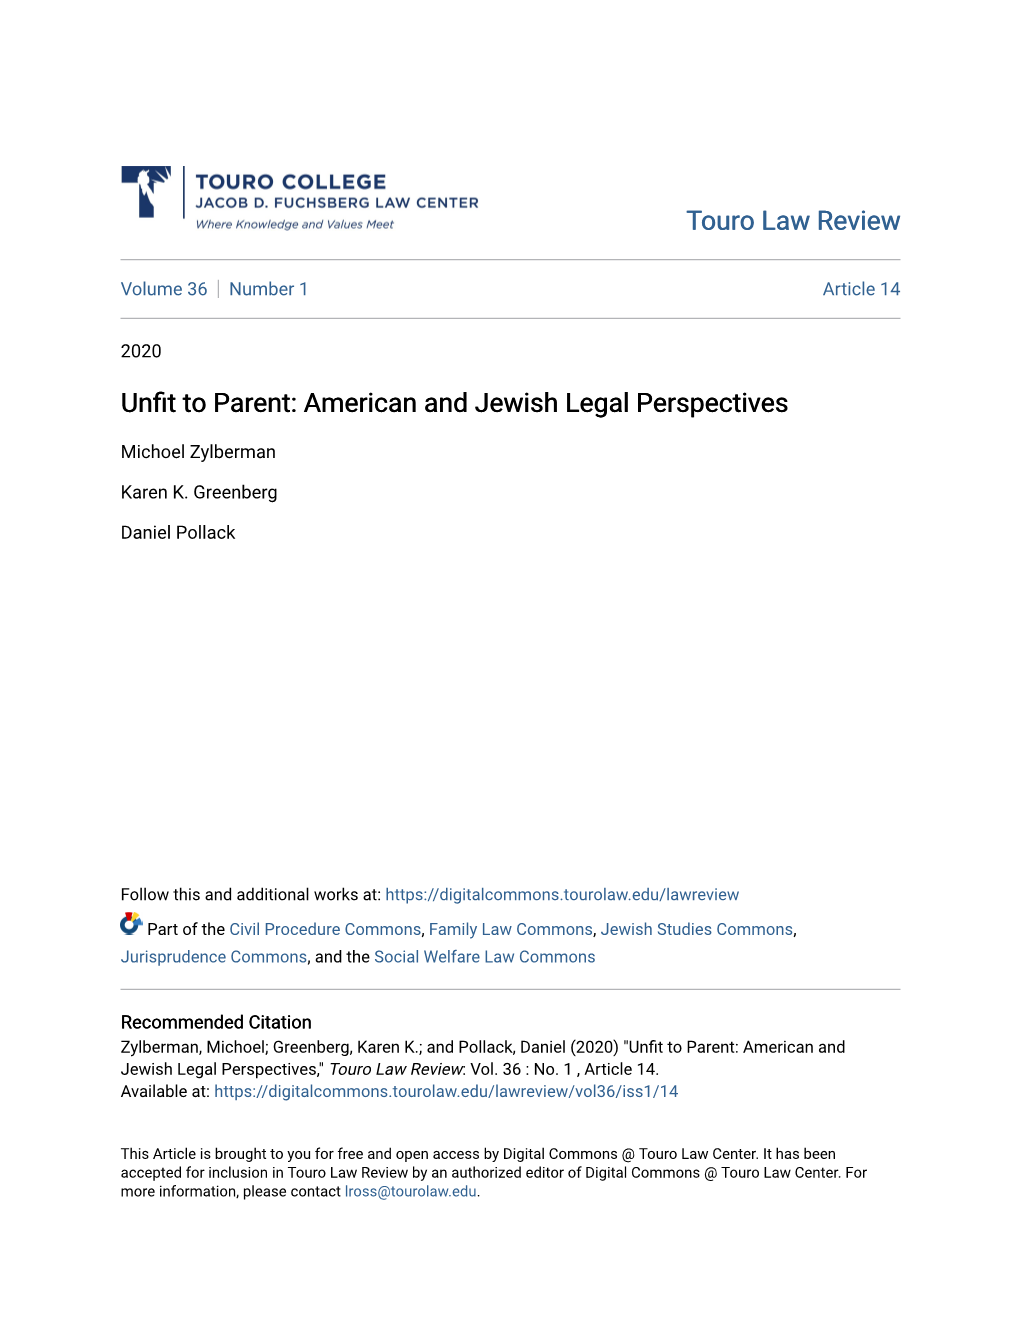 Unfit to Parent: American and Jewish Legal Perspectives